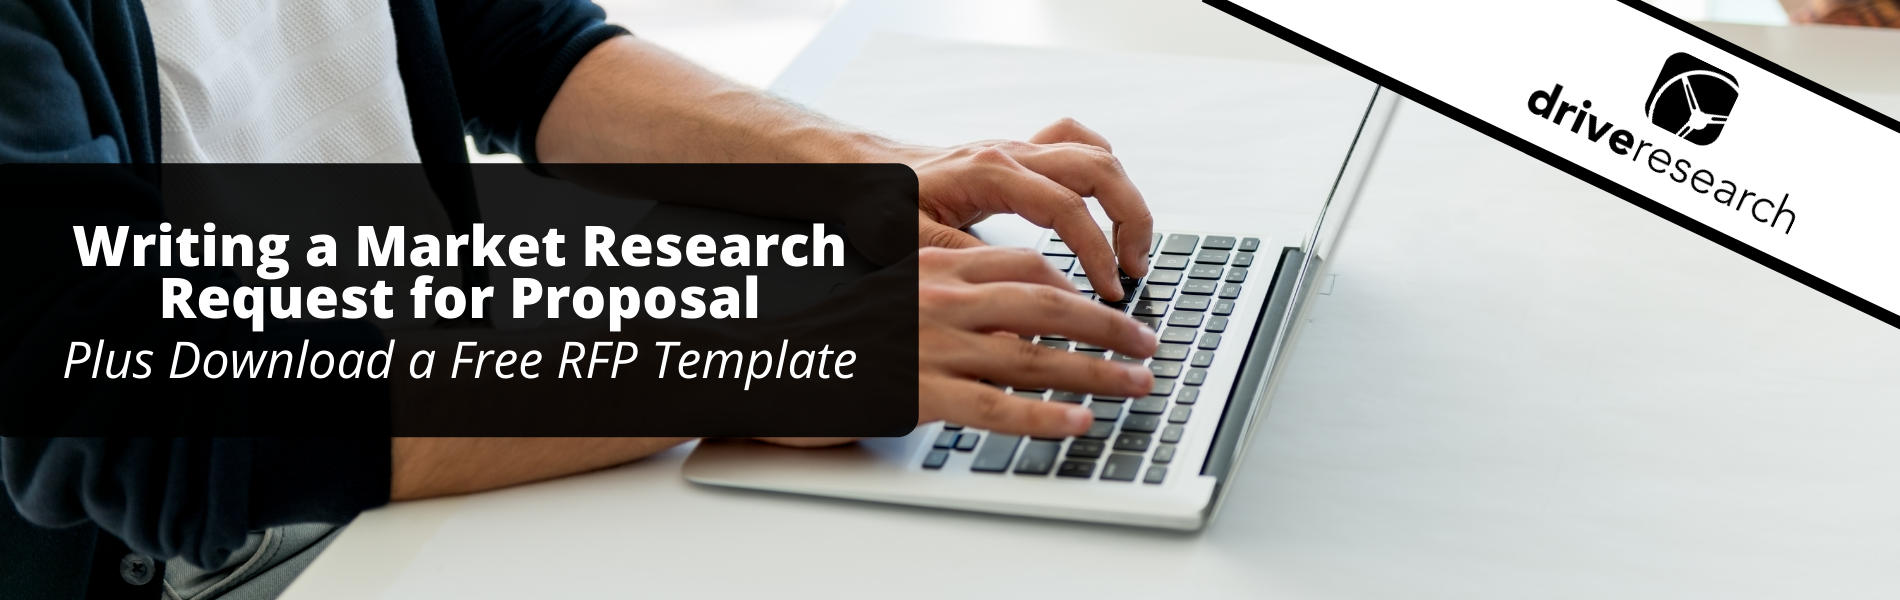 Writing a Market Research Request for Proposal